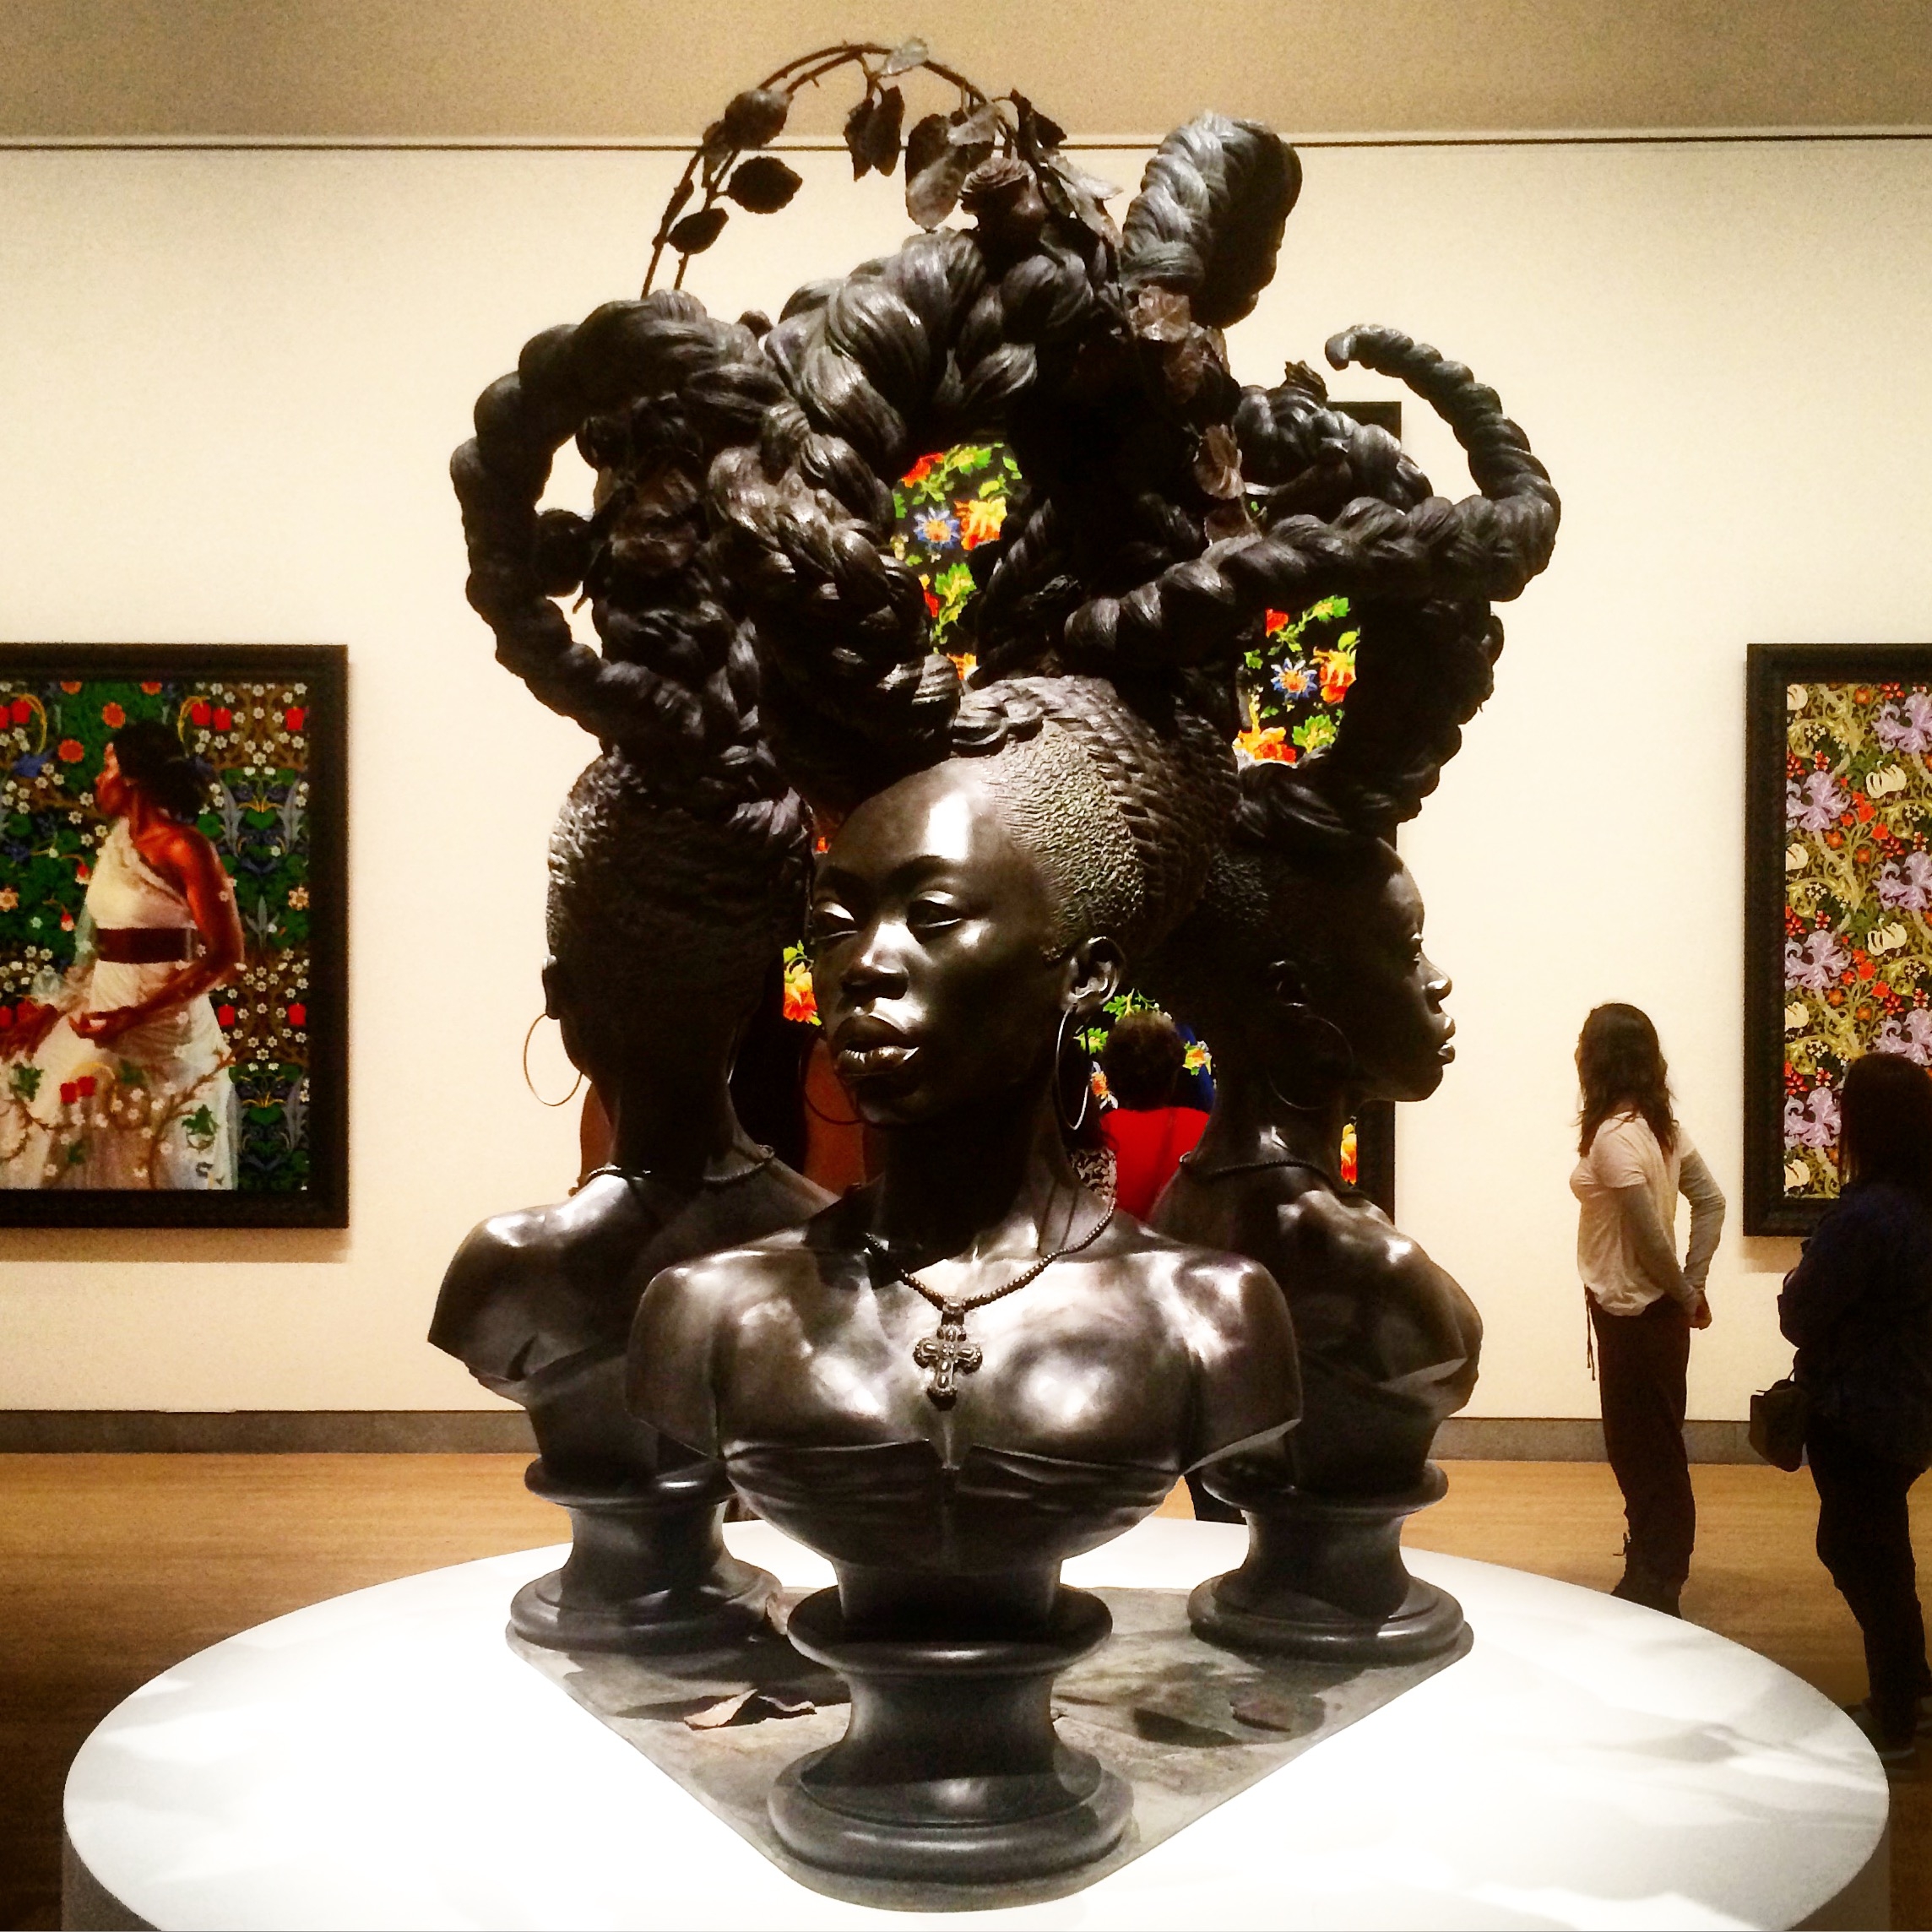 Kehinde Wiley African American Art Amazing Paintings Black Excellence Brooklyn Museum Social Commentary Racism